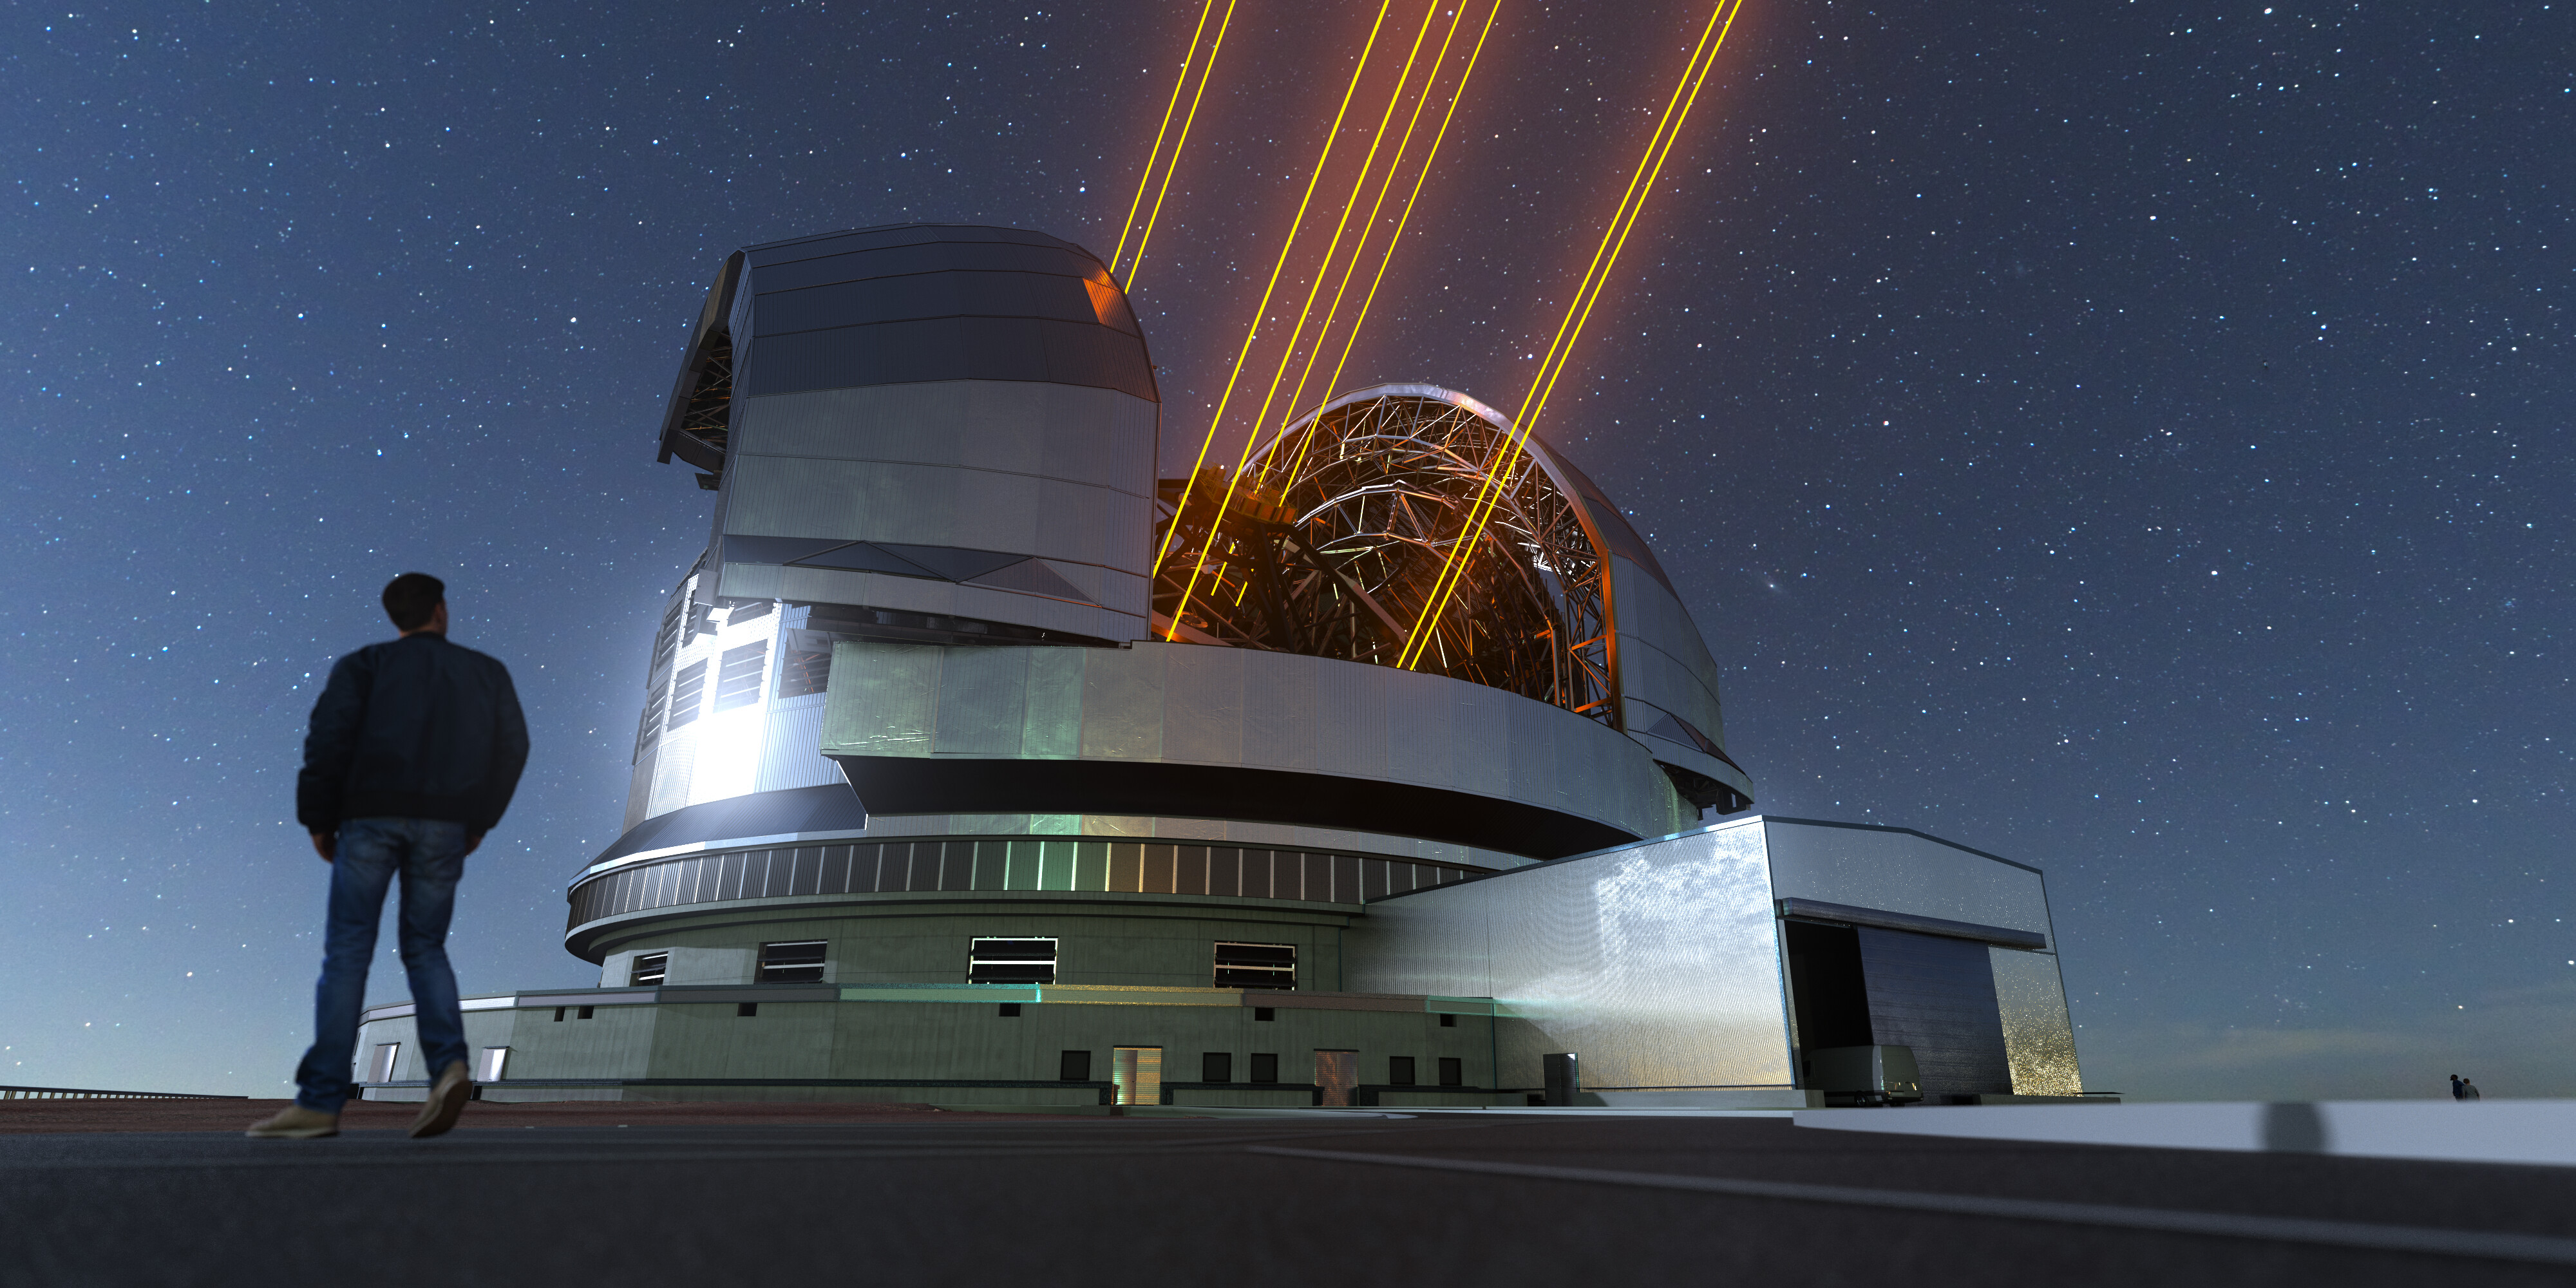 Illustration of a large telescope in the night, shooting rays of light into space.